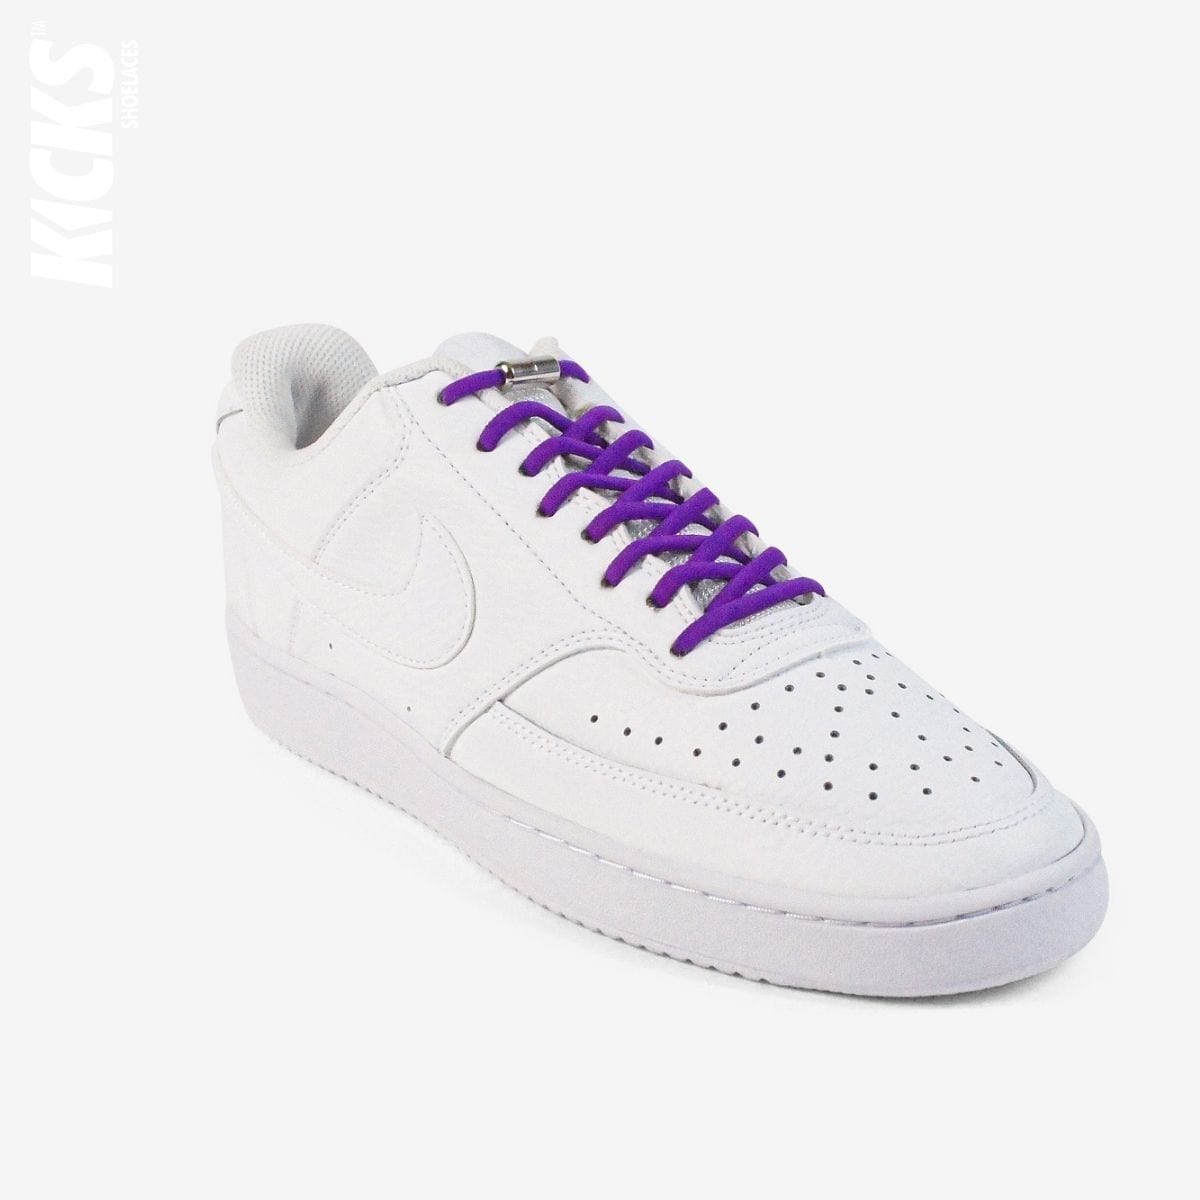 round-no-tie-shoelaces-with-purple-laces-on-nike-white-sneakers-by-kicks-shoelaces